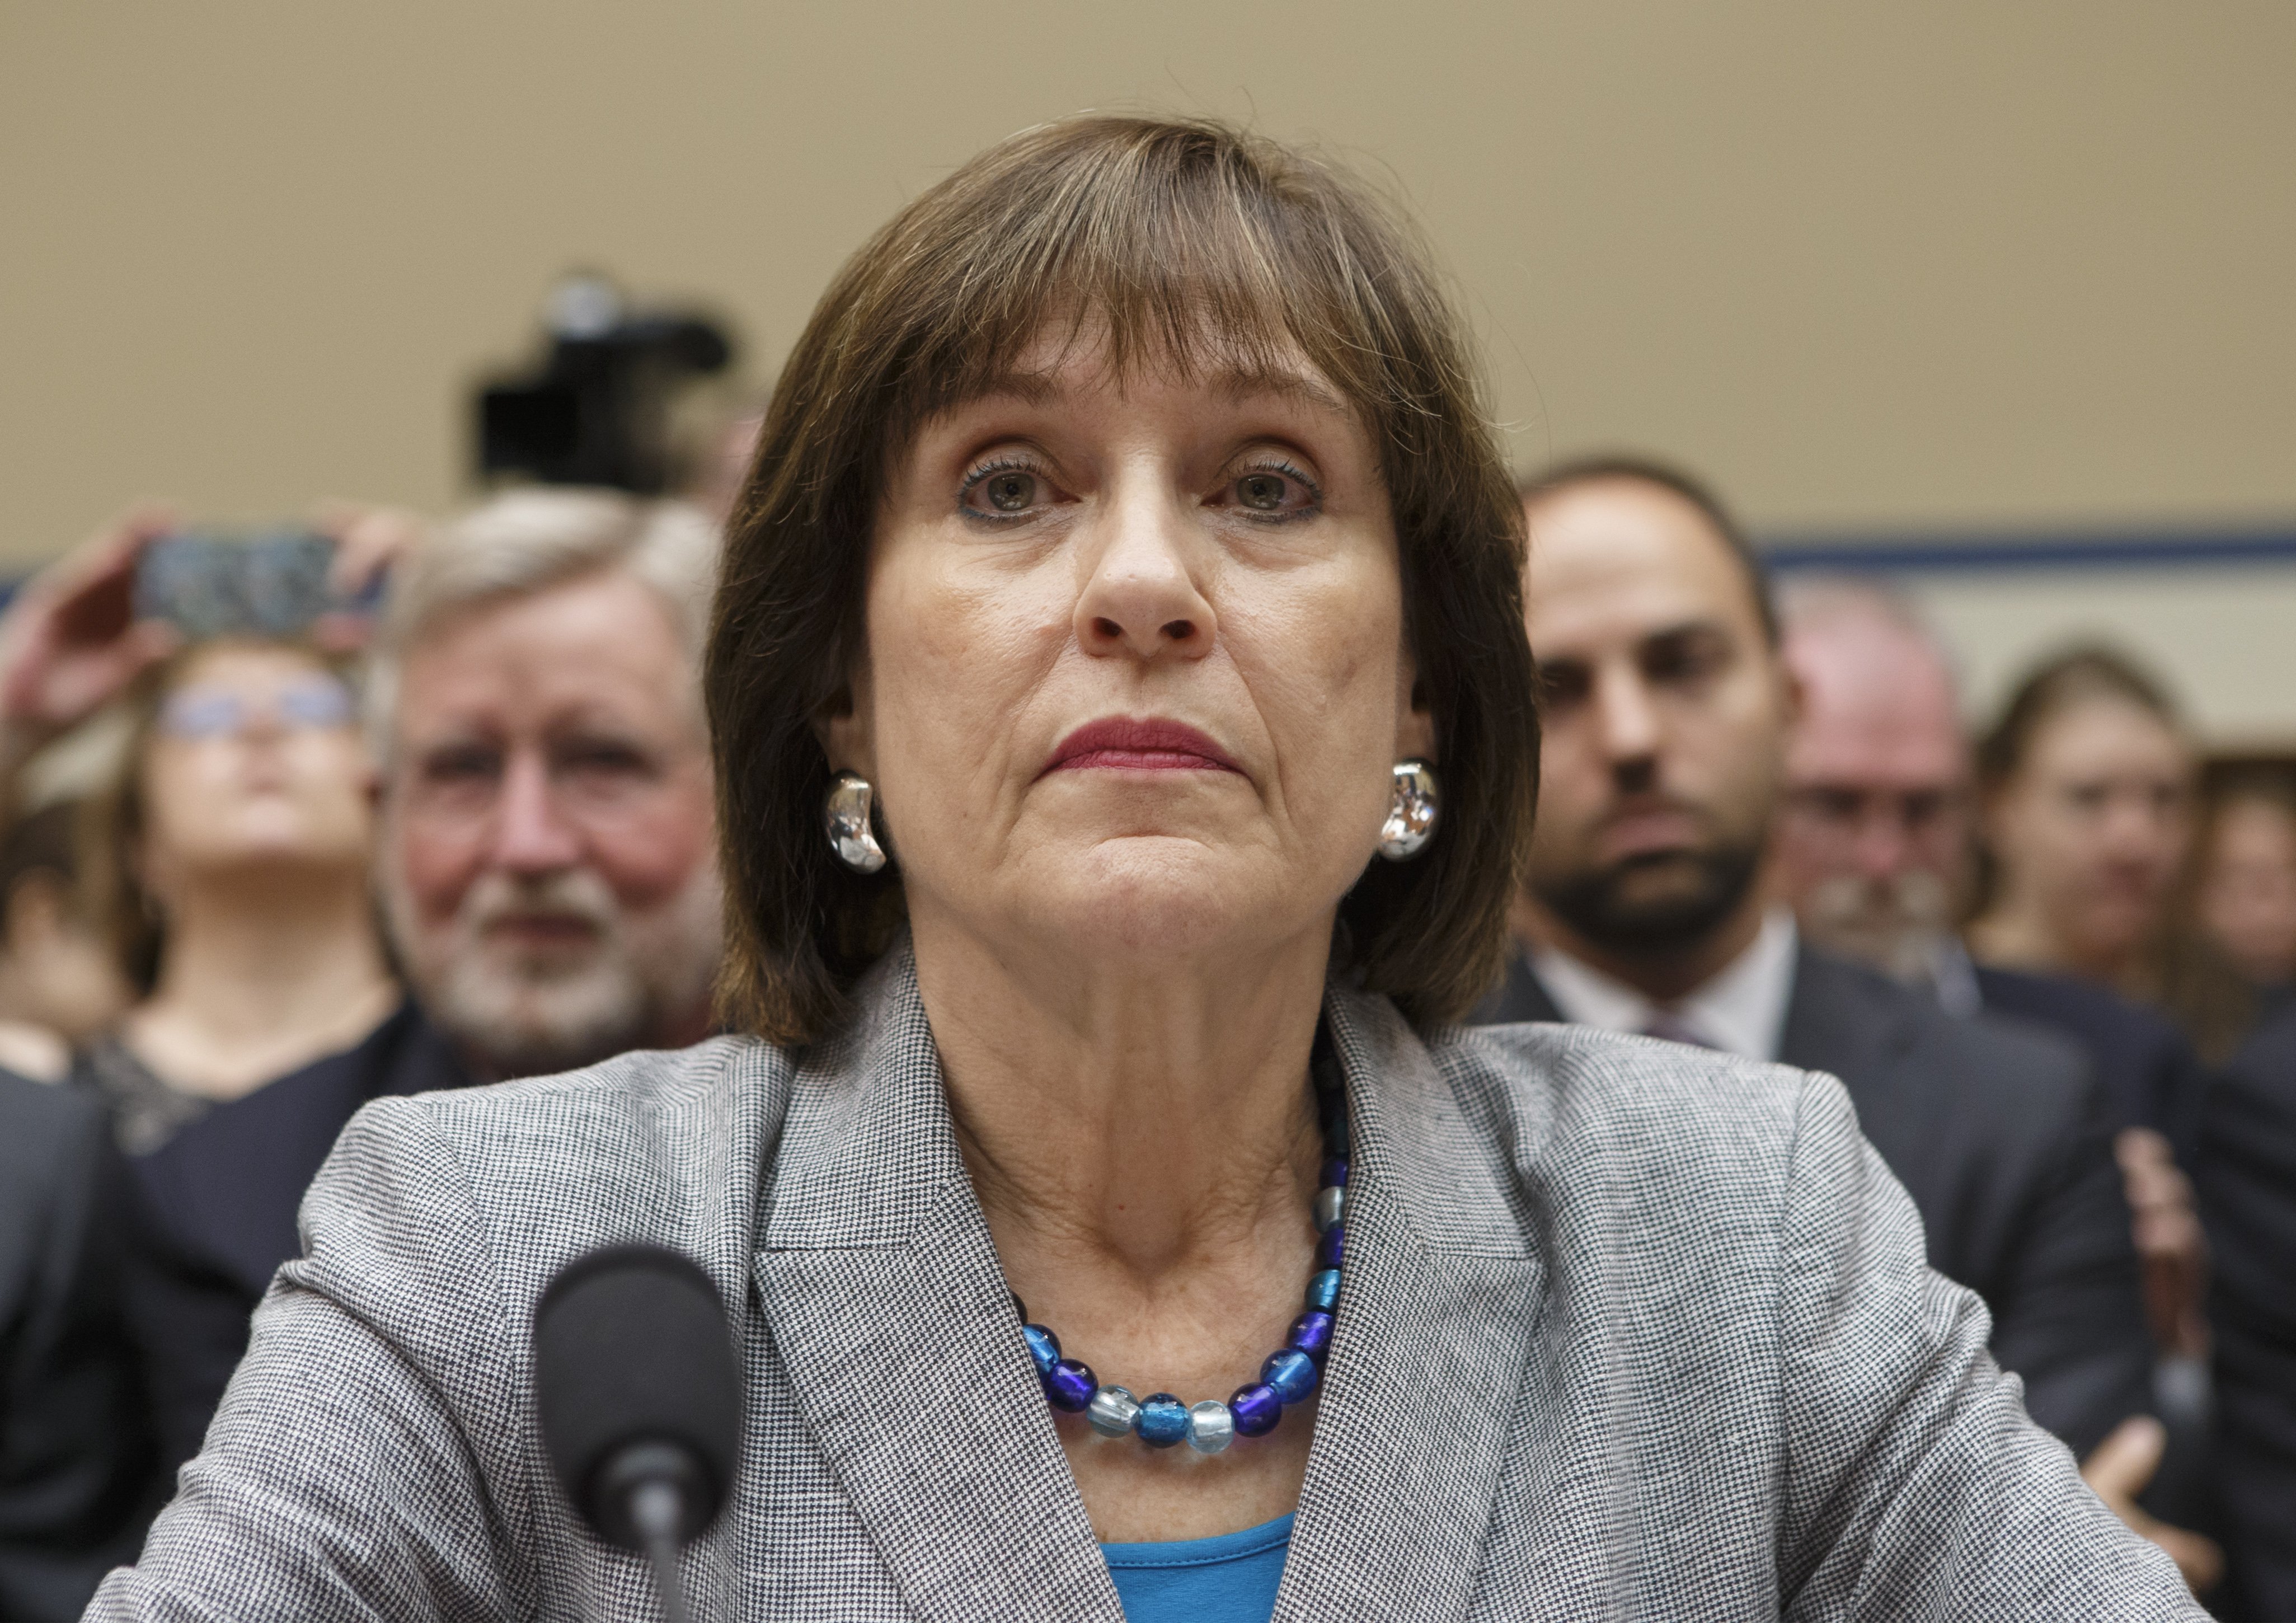 Internal Revenue Service official Lois Lerner refuses to answer questions as the House Oversight Committee holds a hearing to investigate the extra scrutiny the IRS gave Tea Party and other conservative groups that applied for tax-exempt status, on Capitol Hill in Washington, D.C., on May 22, 2013. (J. Scott Applewhite—AP)